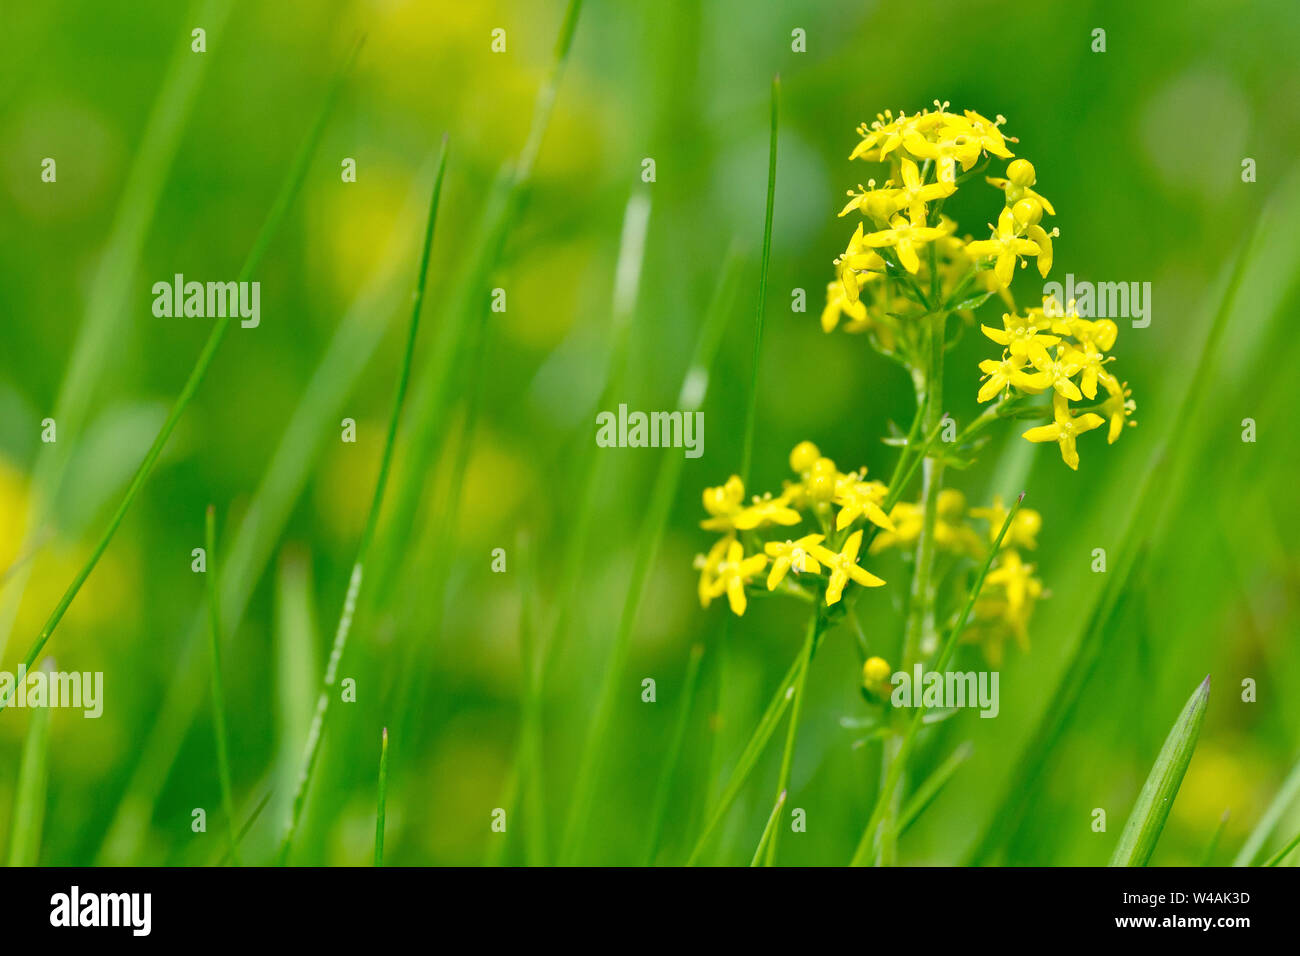 Lady's Bedstraw (galium verum), close up of a single flowering plant growing though the grass. Stock Photo